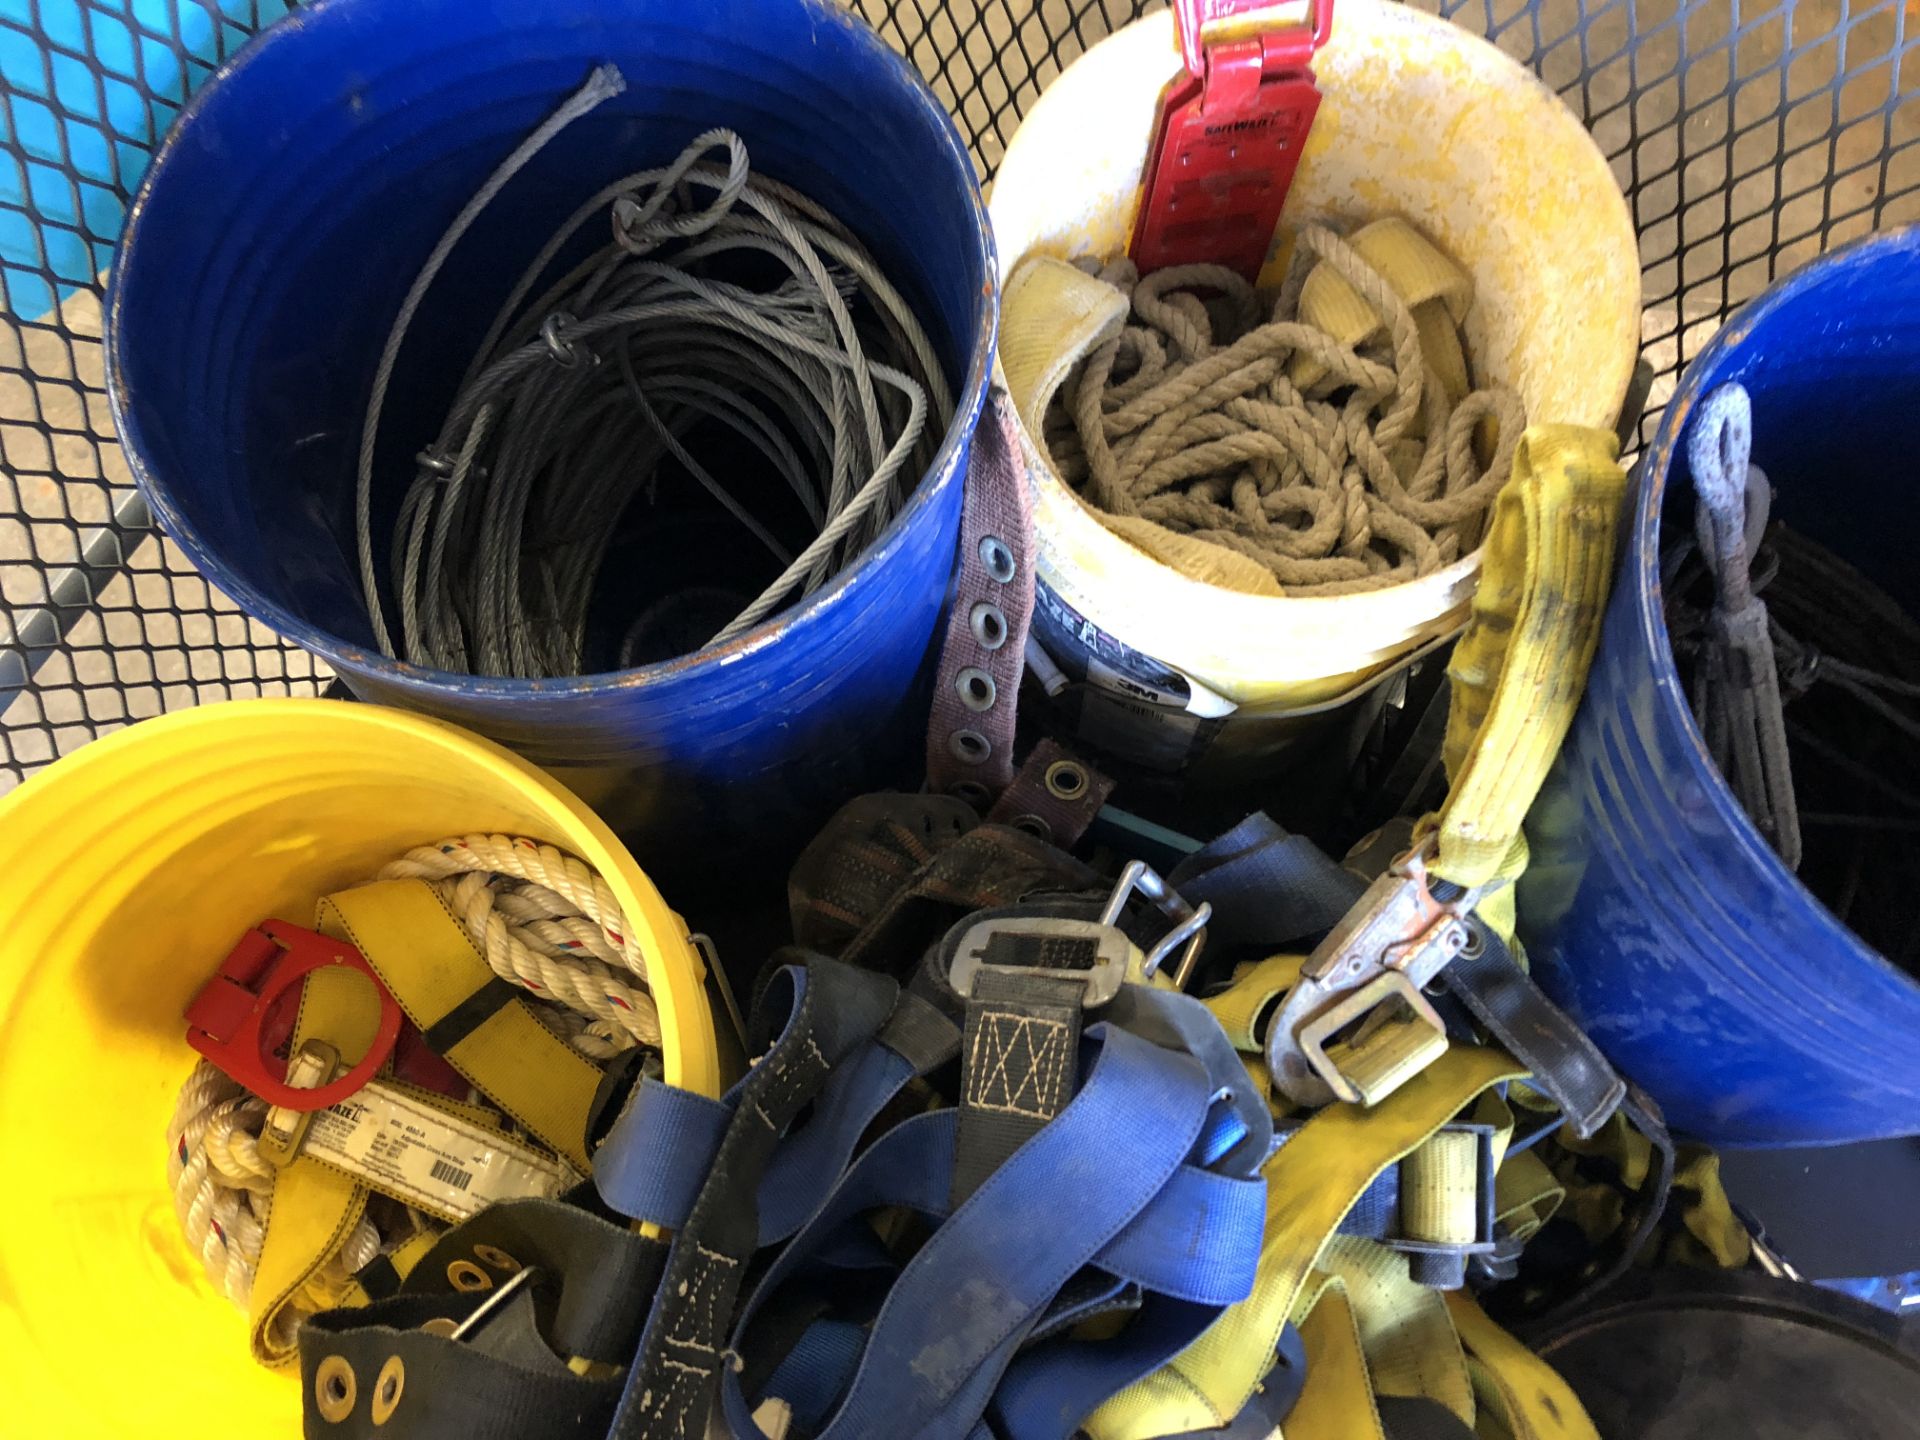 CONTENTS OF TOP SHELF INCLUDING SAFETY HARNESSES; ROPE; CABLE; JOHN DEERE COMPONENTS & MORE - Image 2 of 3